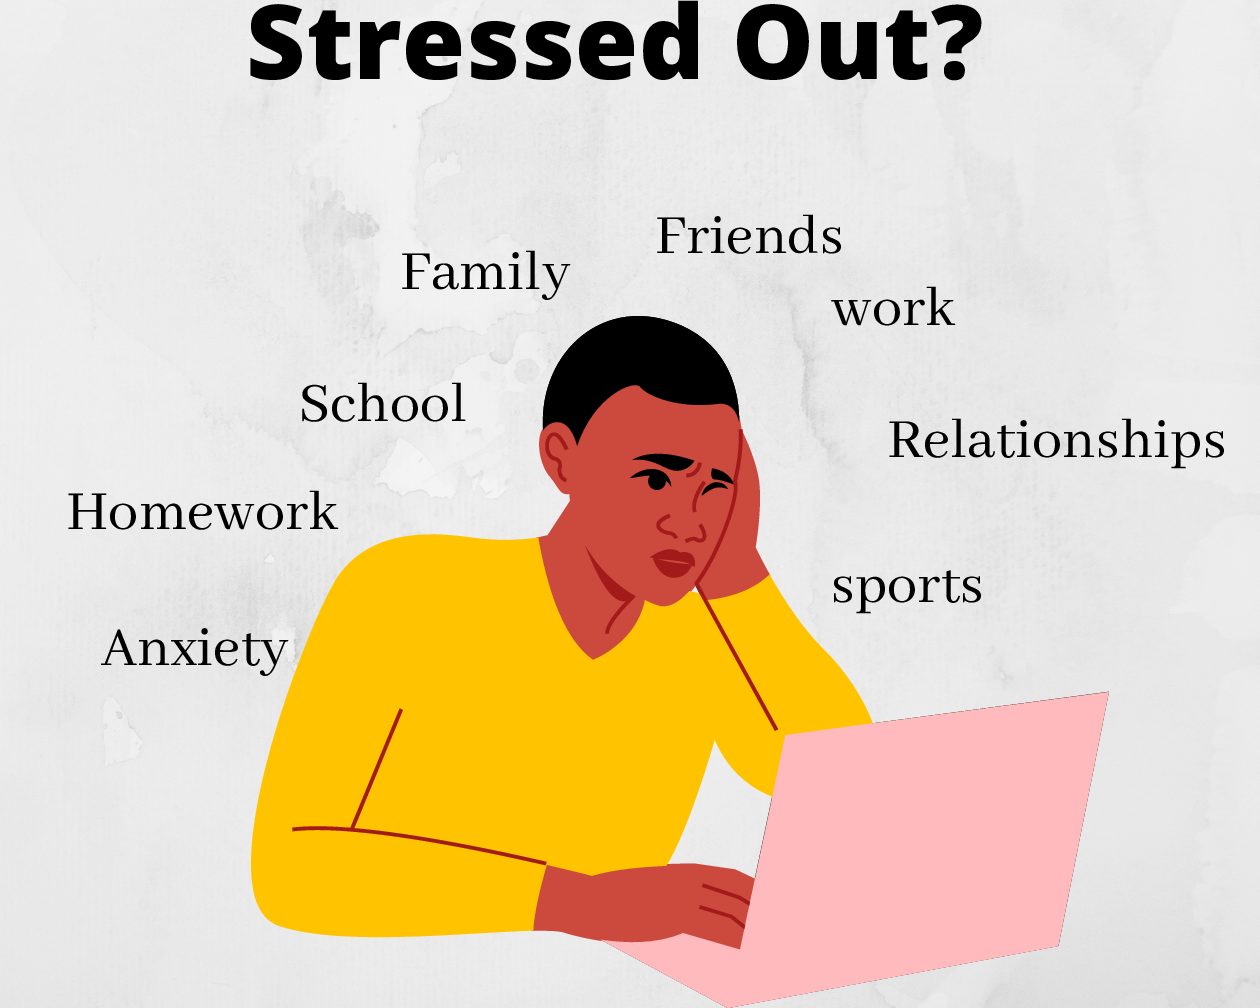 Many different things can trigger stress in anyone at any age.